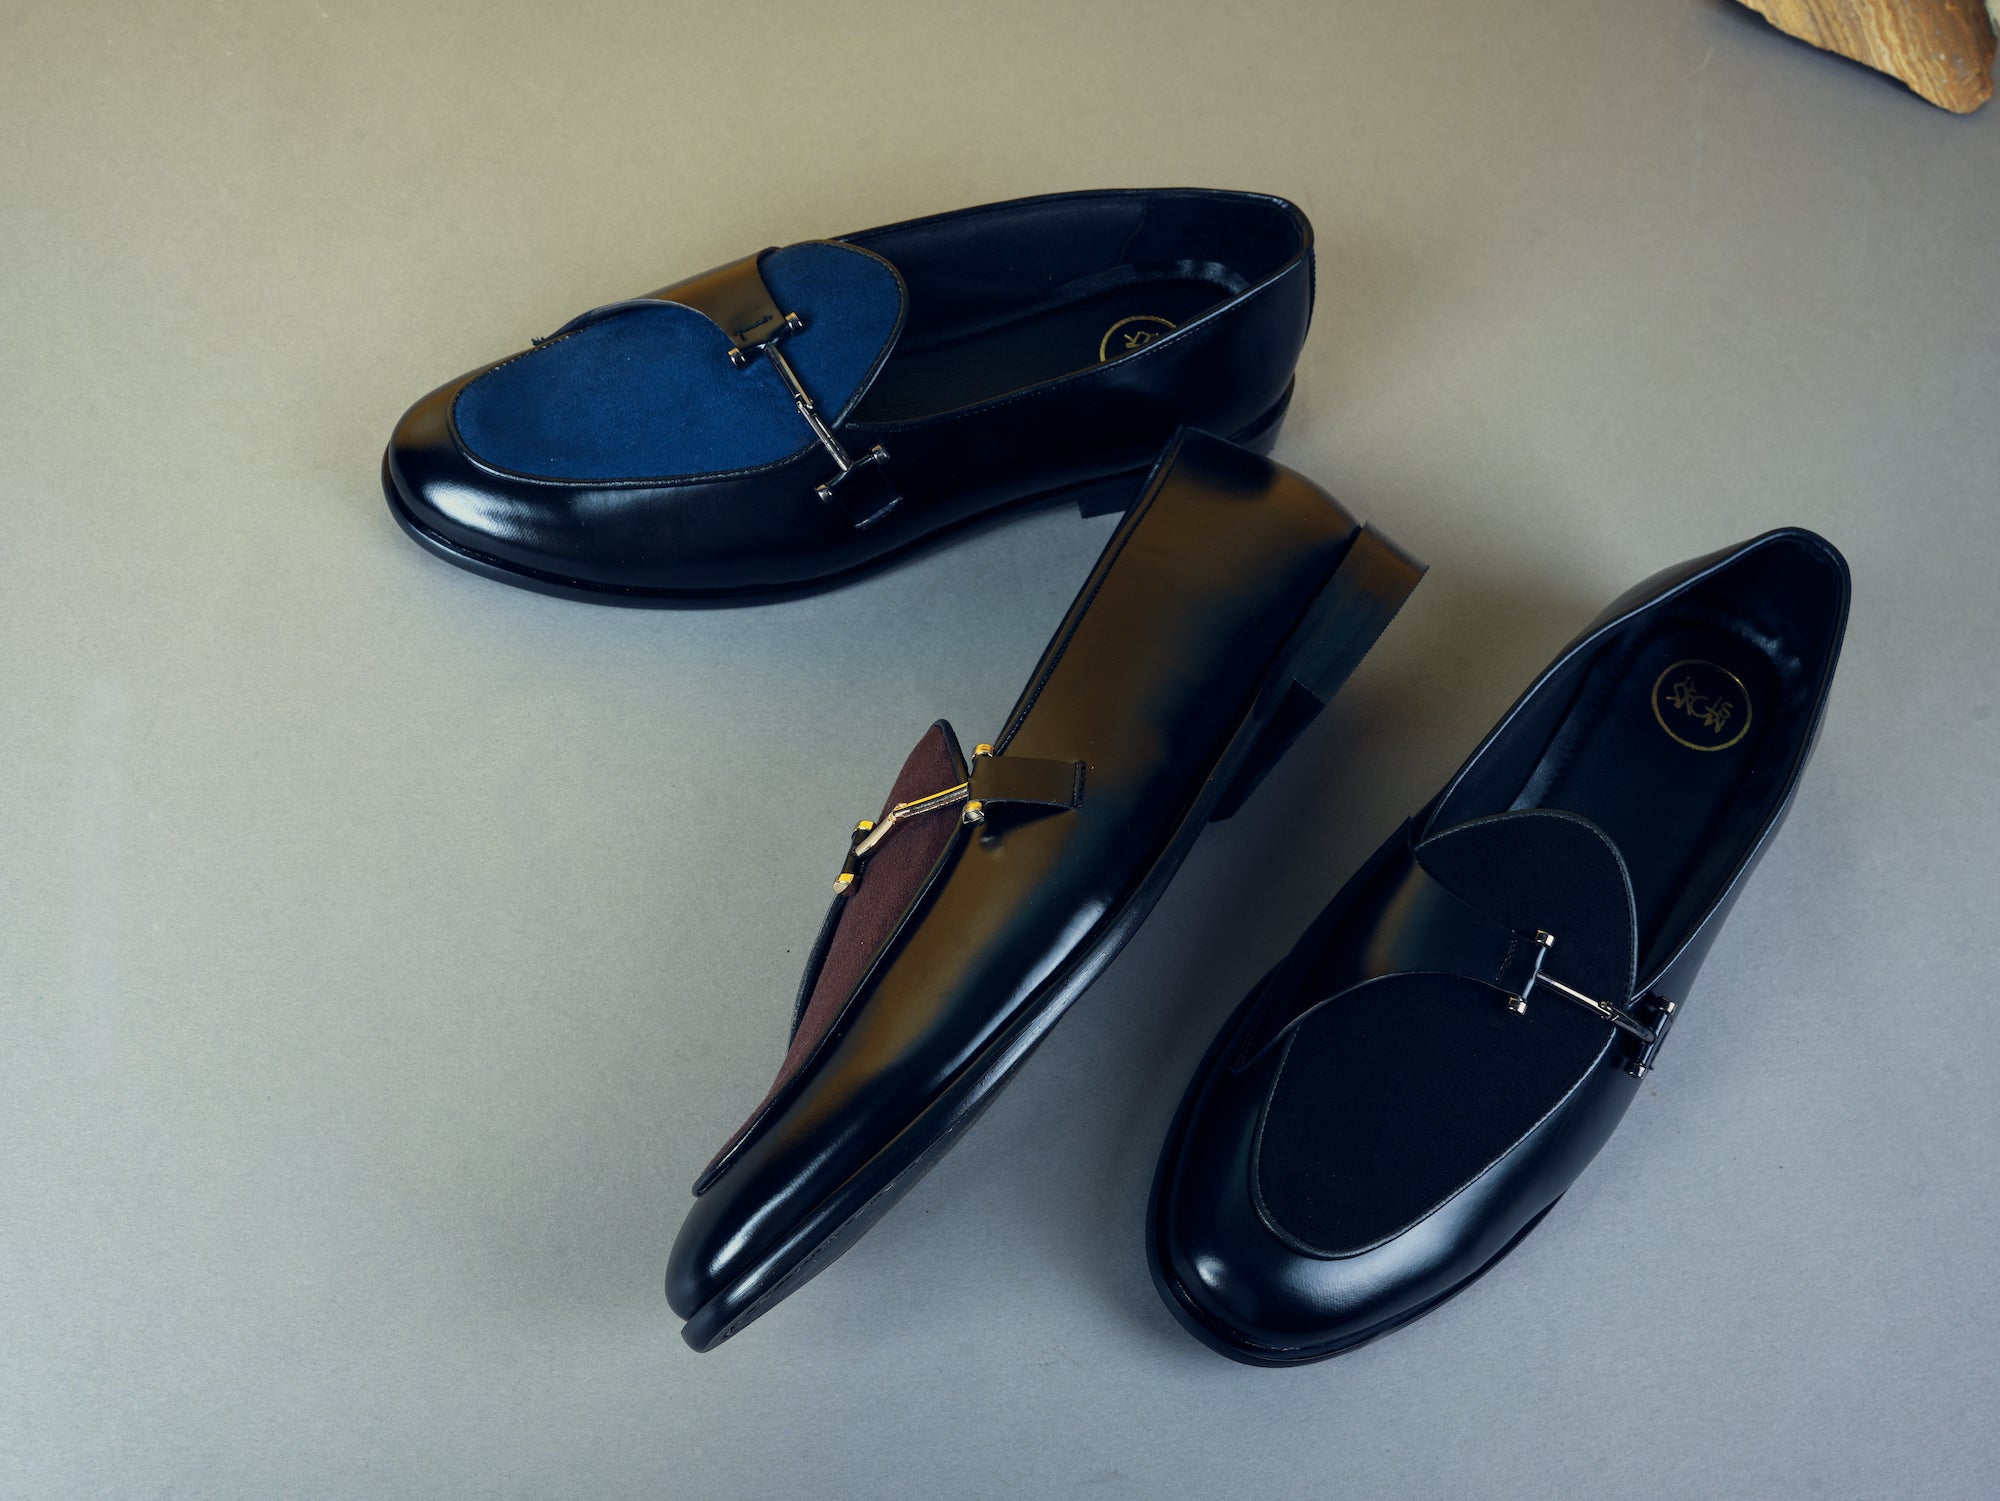 Two pairs of stylish loafers on a gray surface.